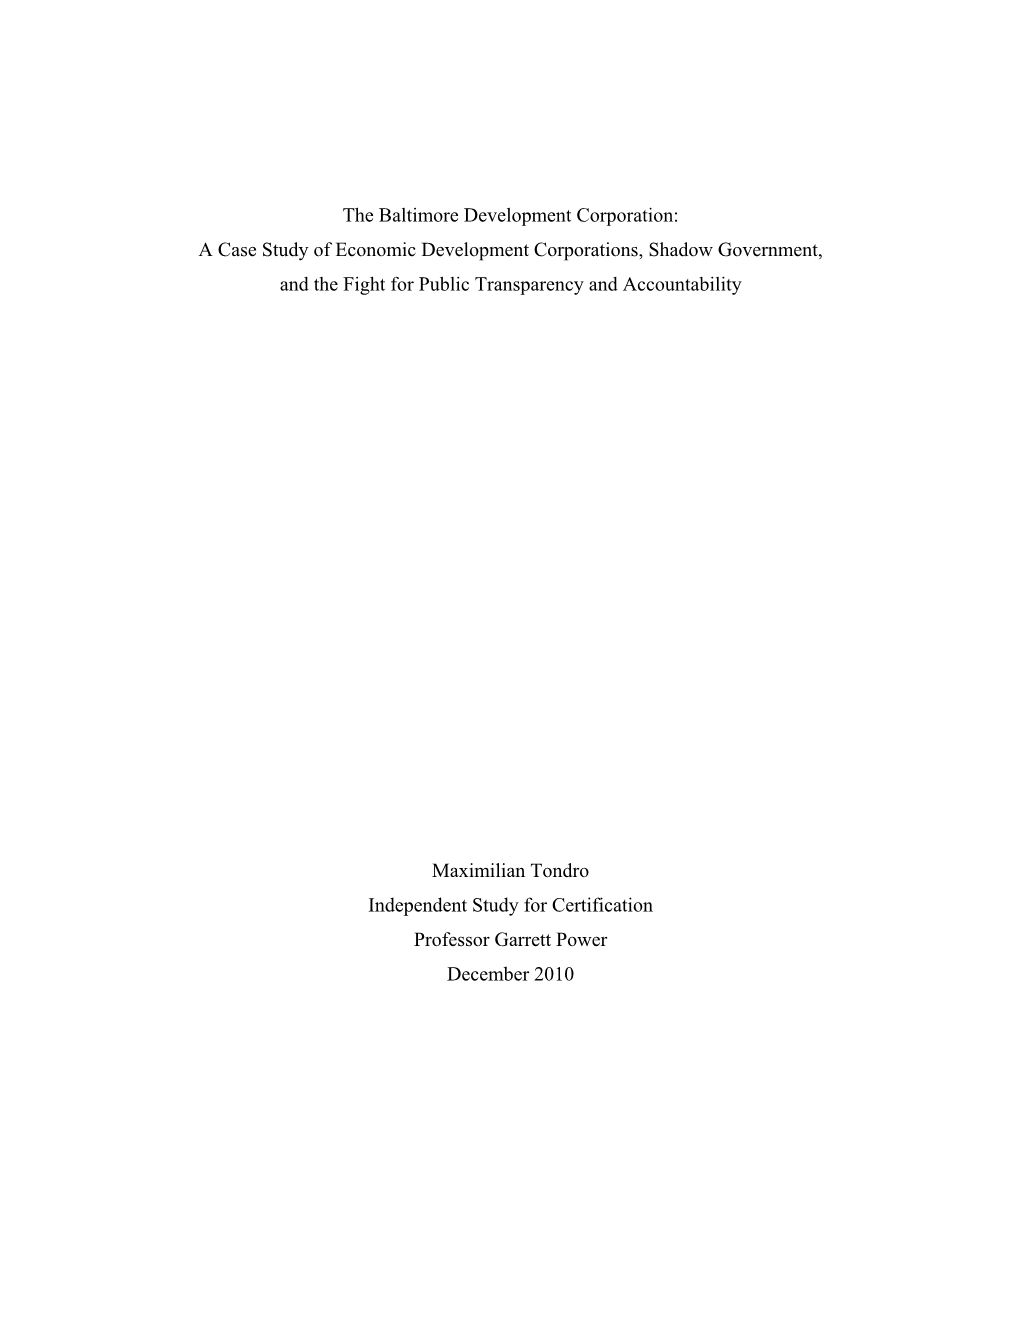 The Baltimore Development Corporation: a Case Study of Economic Development Corporations, Shadow Government, and the Fight for Public Transparency and Accountability